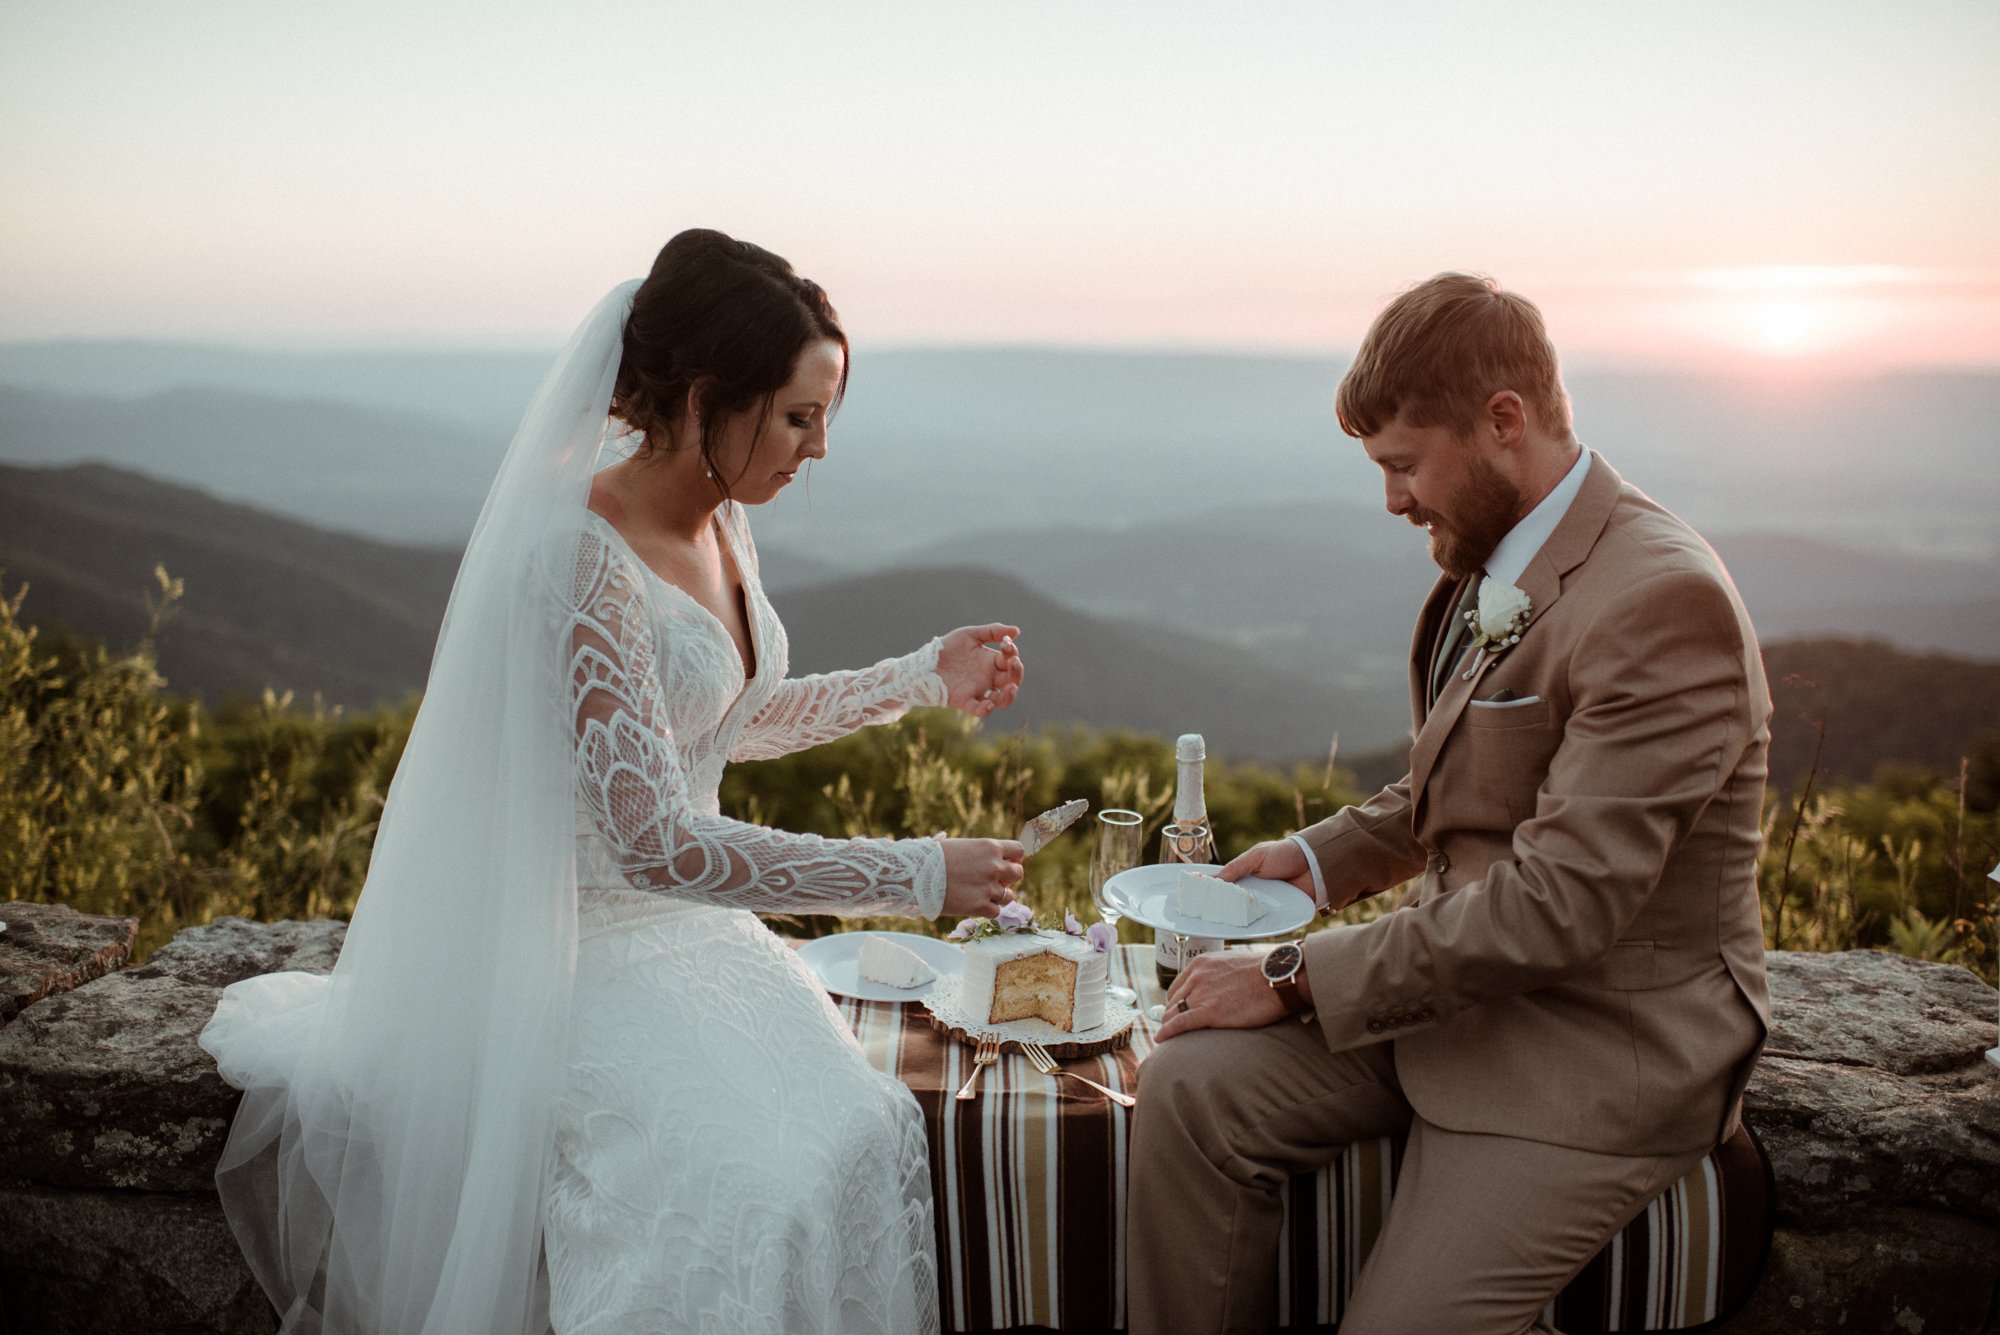 Sunset Elopement on Stony Man Summit in Shenandoah National Park - White Sails Creative Elopement Photography - July Elopement on the Blue Ridge Parkway_65.jpg